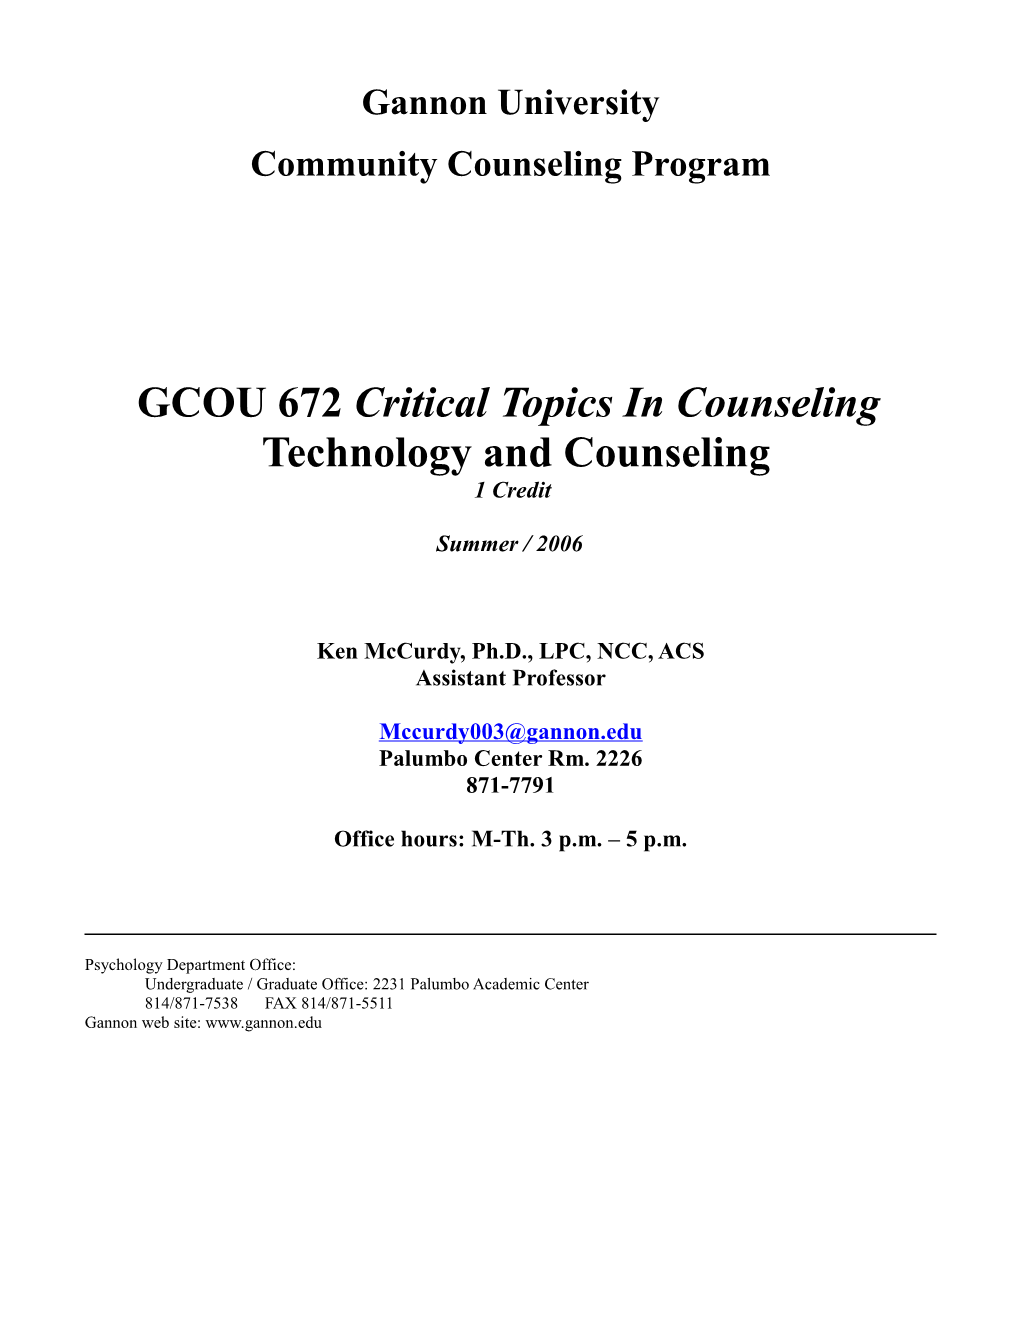 Technology and Counseling